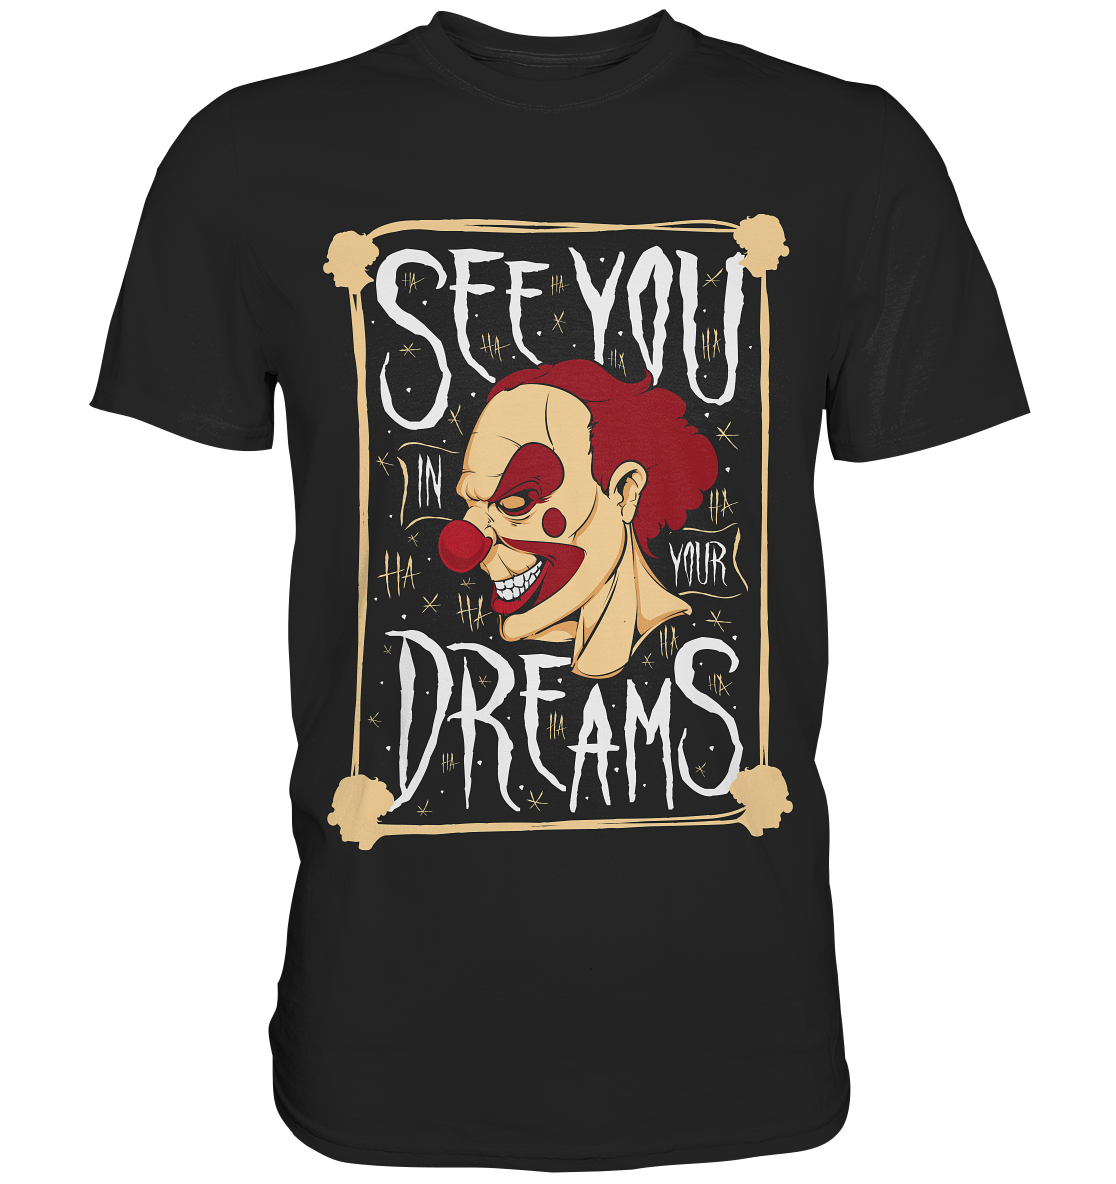 See you in your dreams - Premium Shirt